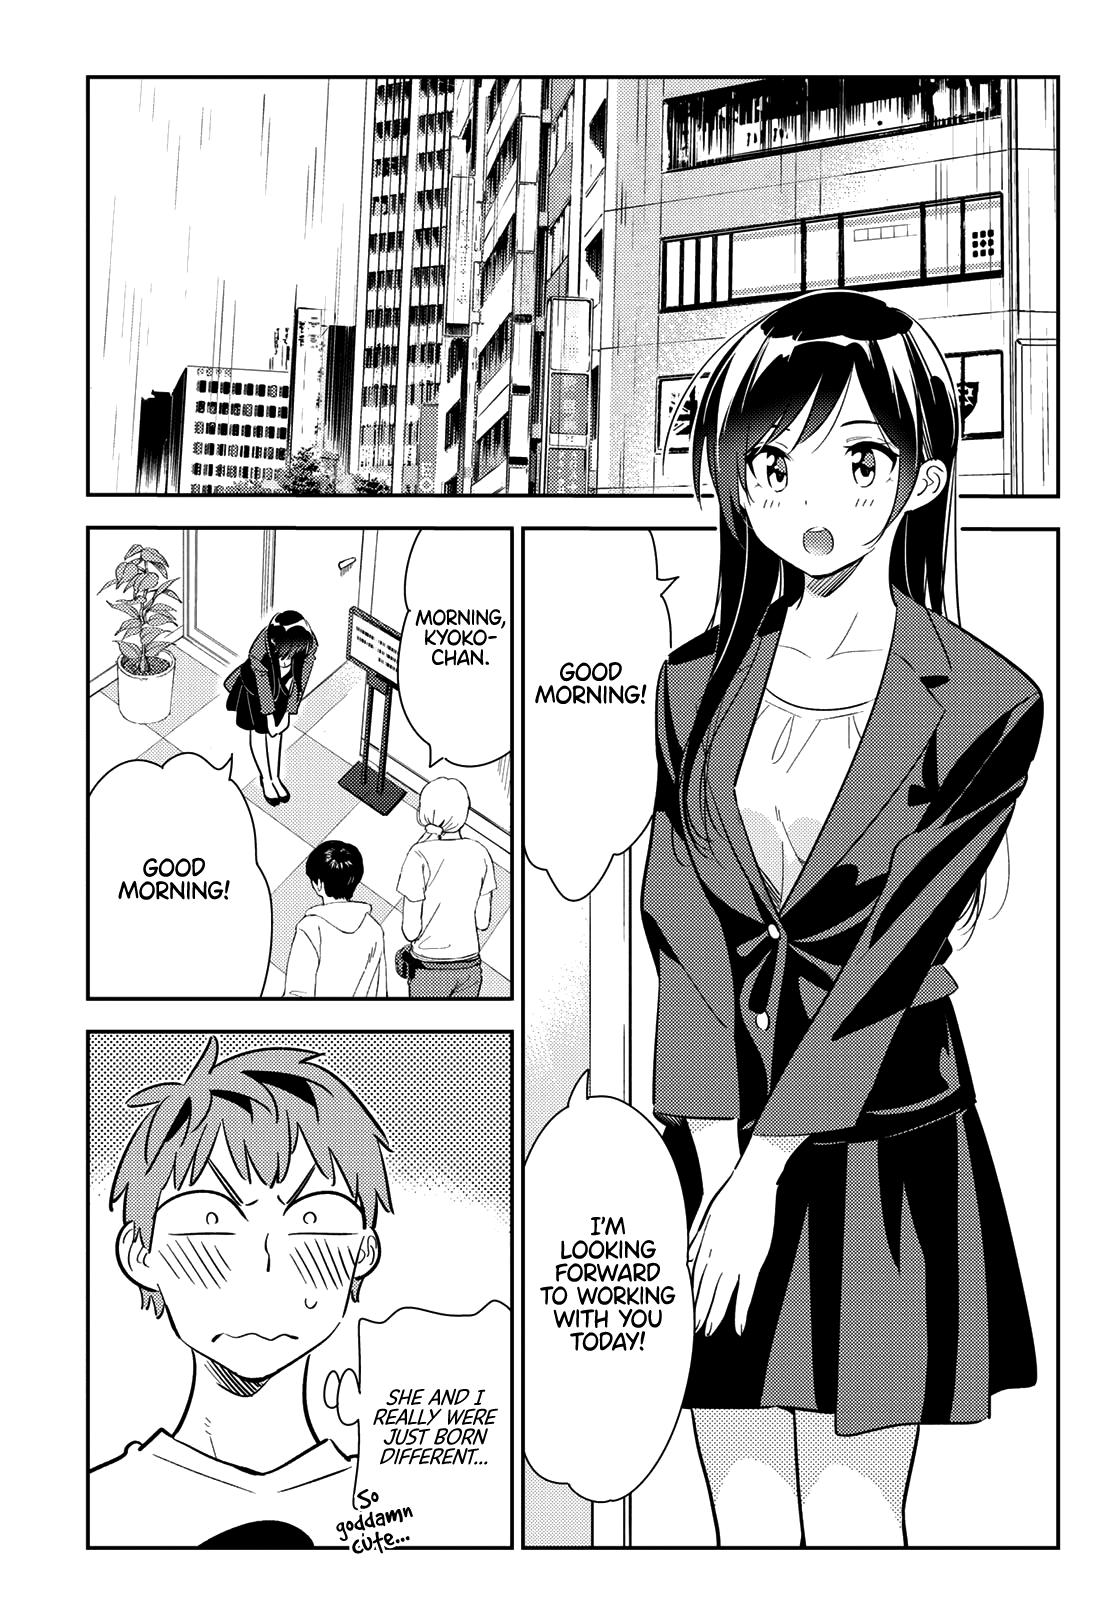 Rent A GirlFriend, Chapter 131 image 005